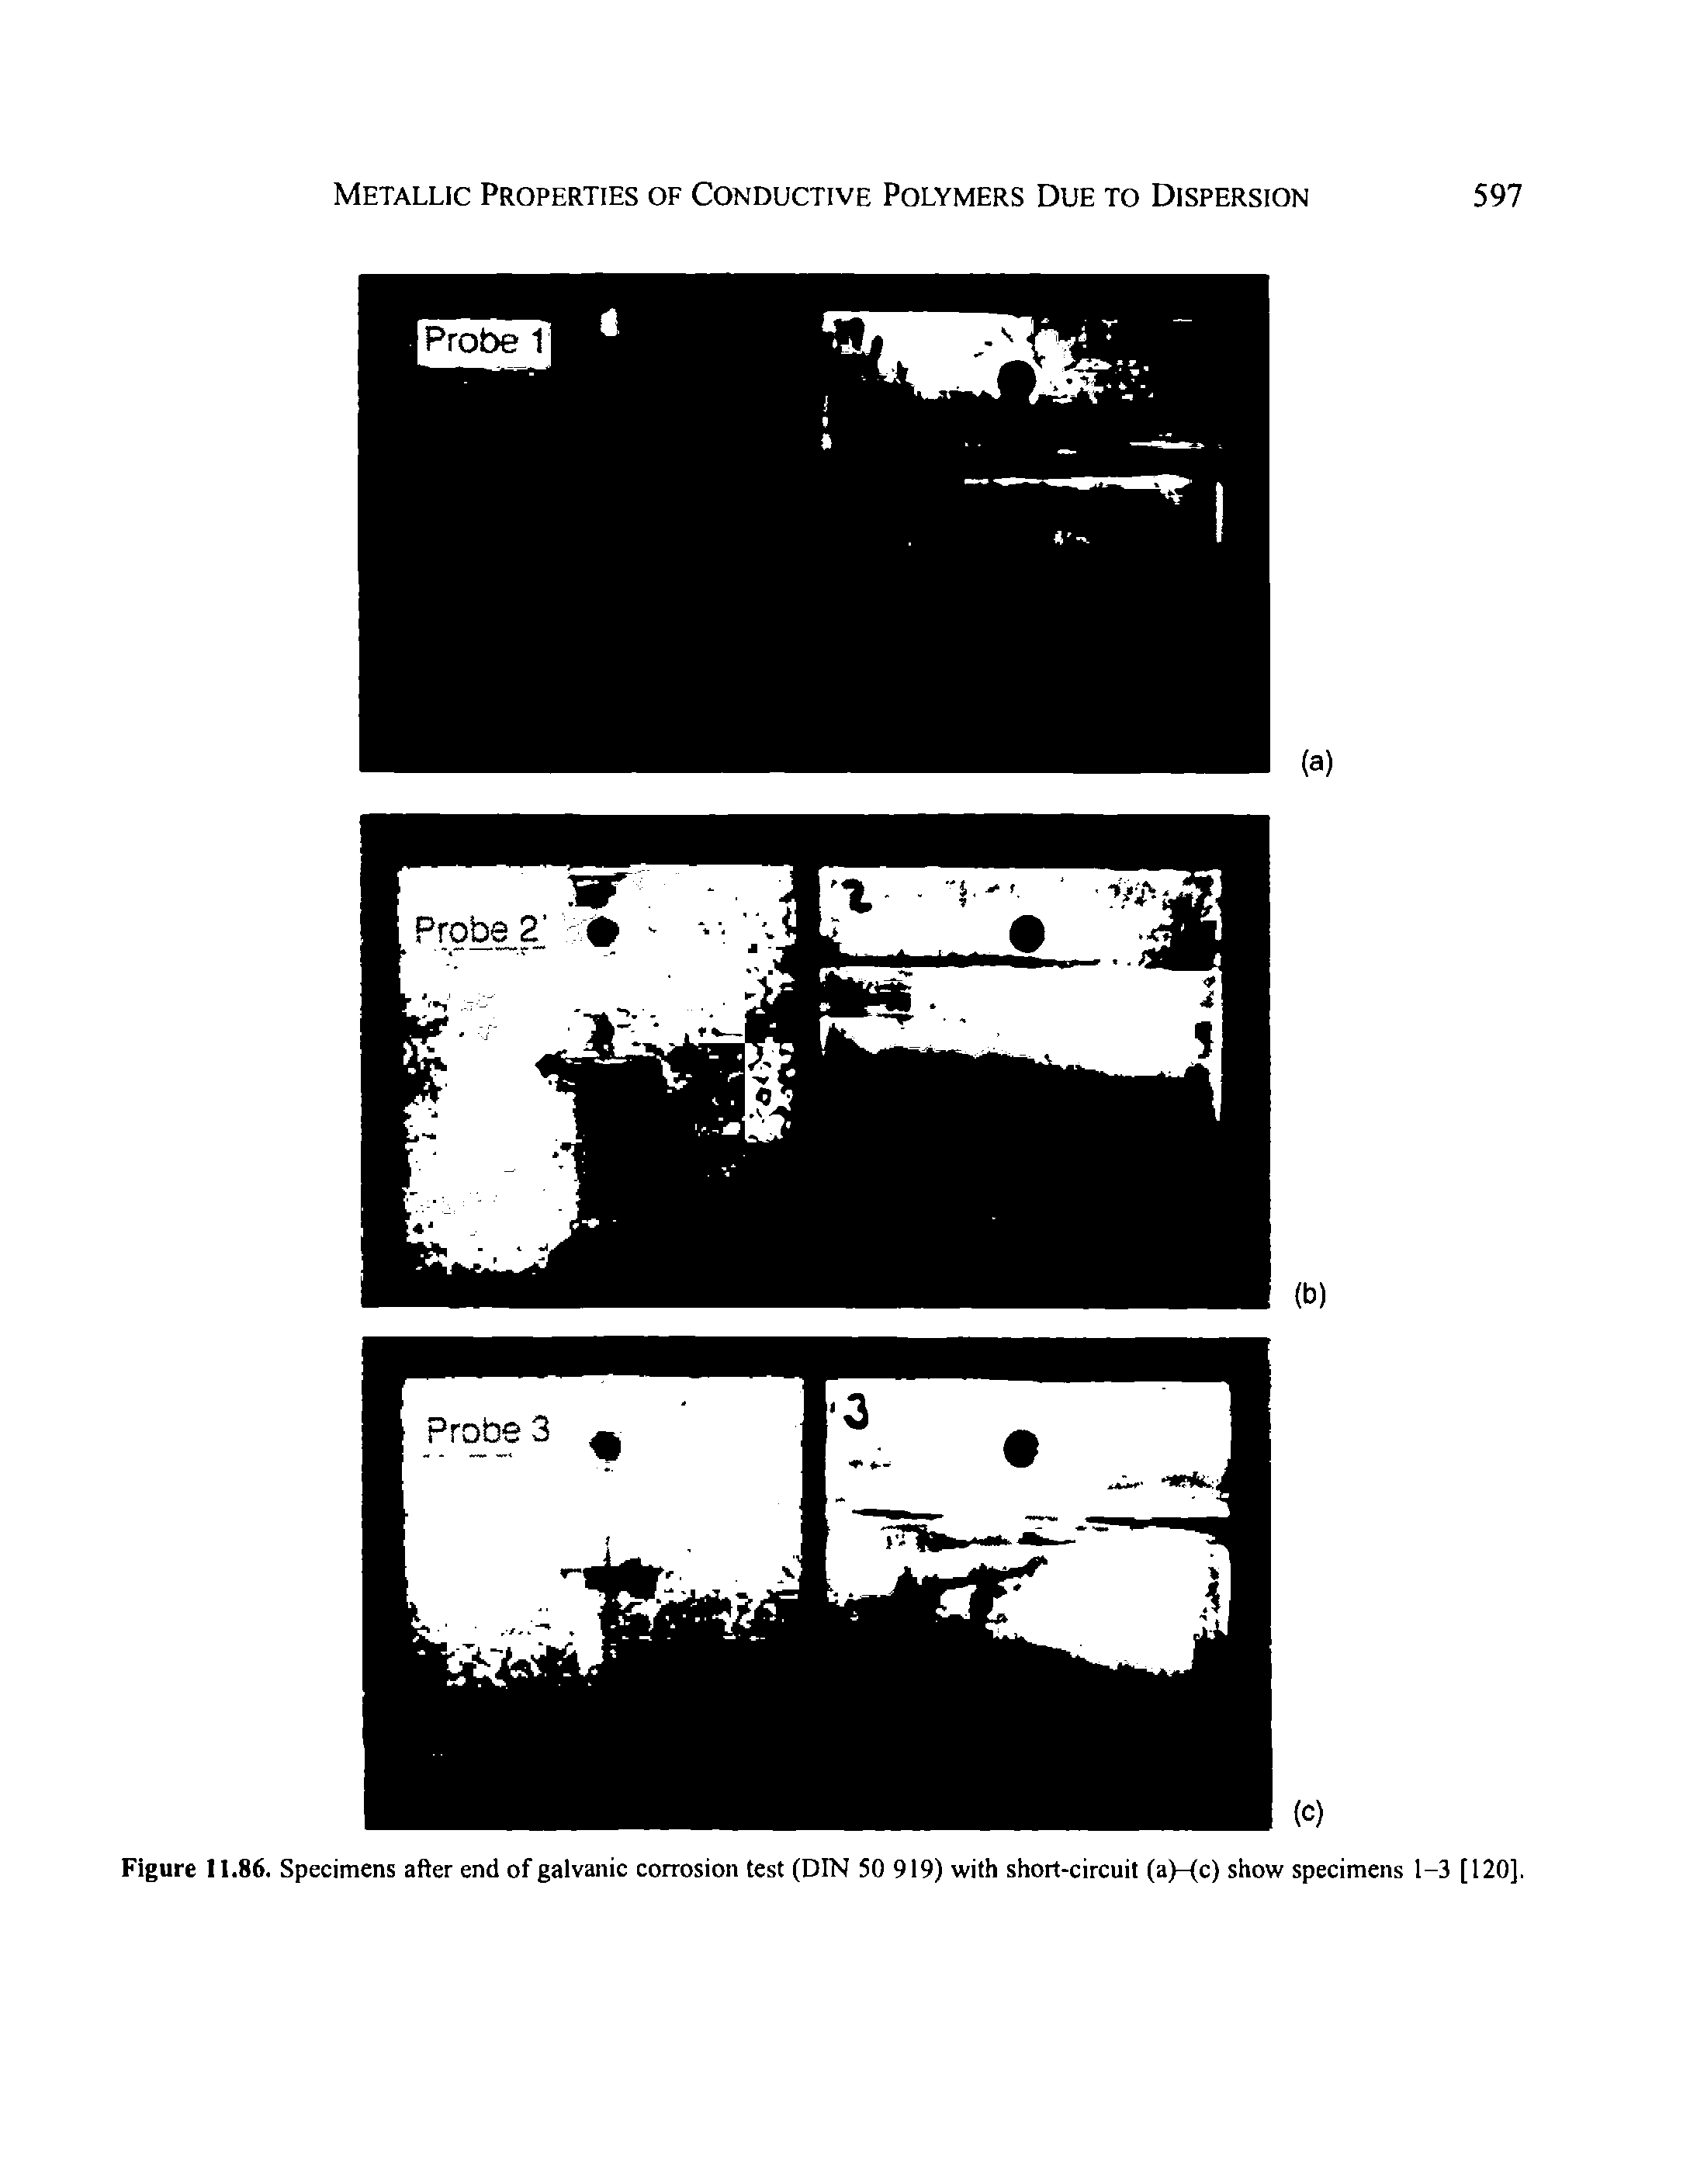 Figure 11.86. Specimens after end of galvanic corrosion test (DIN 50 919) with short-circuit (a)-(c) show specimens 1-3 [120],...